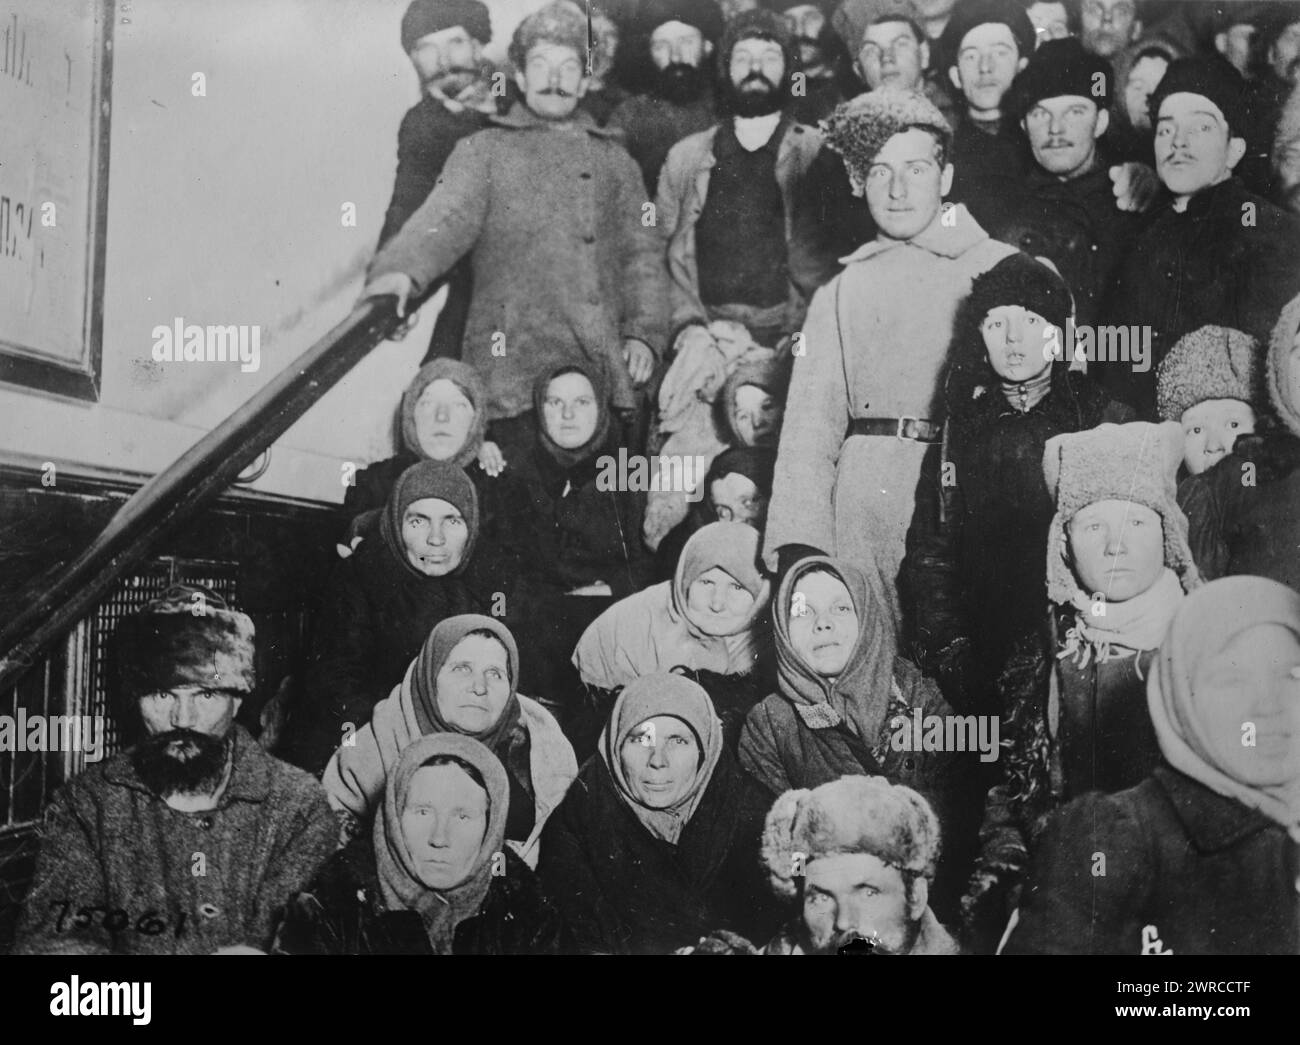 Refugees in R.R. station, Cheliabinsk, Photograph shows refugee men and women gathered at a train station at Chelyabinsk, Russia., between ca. 1915 and ca. 1920, Glass negatives, 1 negative: glass Stock Photo